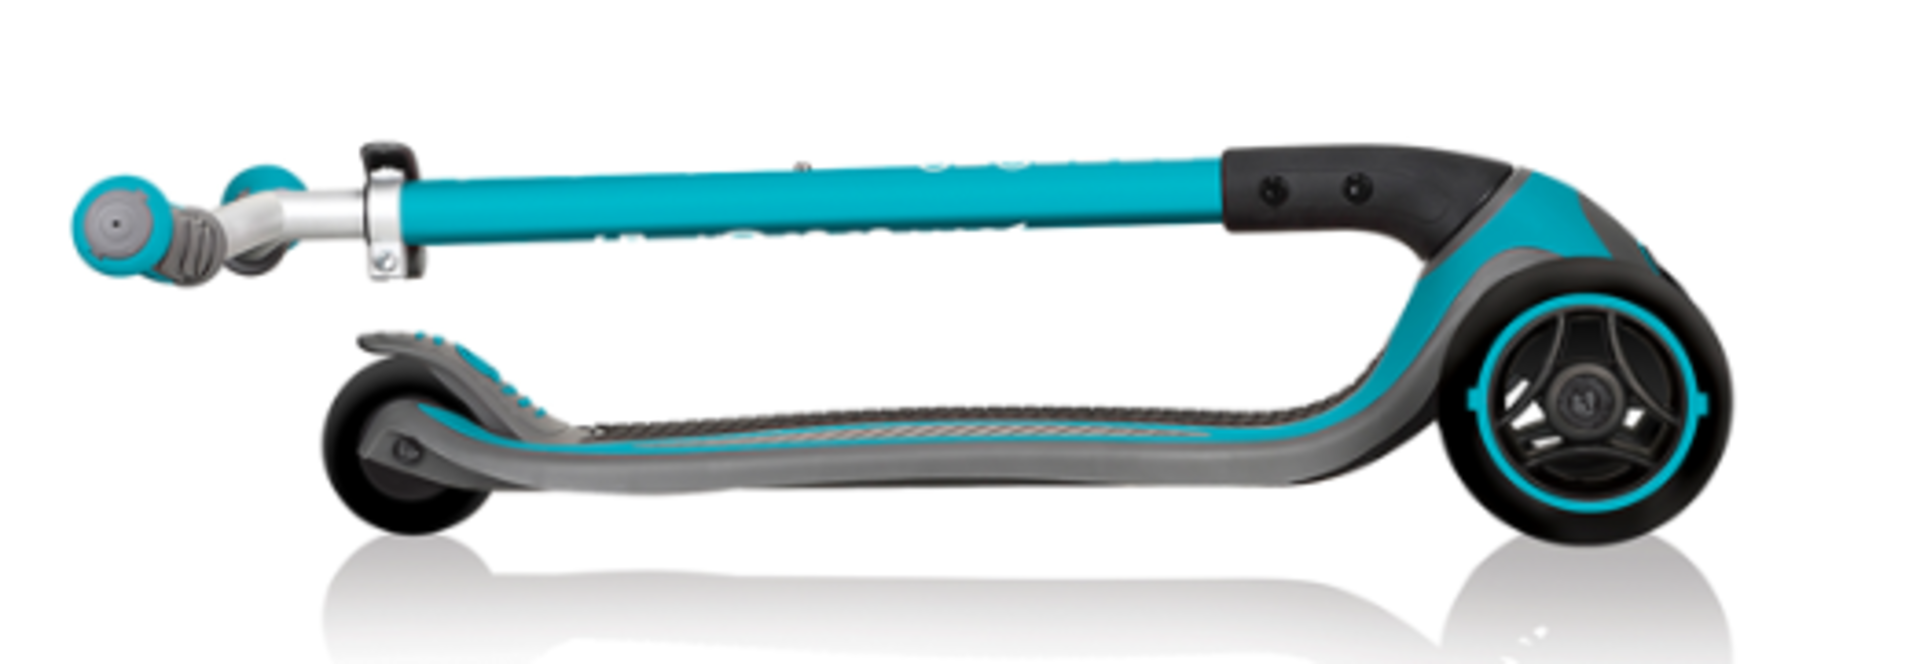 Globber Master Scooter. Teal. RRP £125.00. Our XL 3-wheel foldable scooters for kids aged 4 to - Image 2 of 2